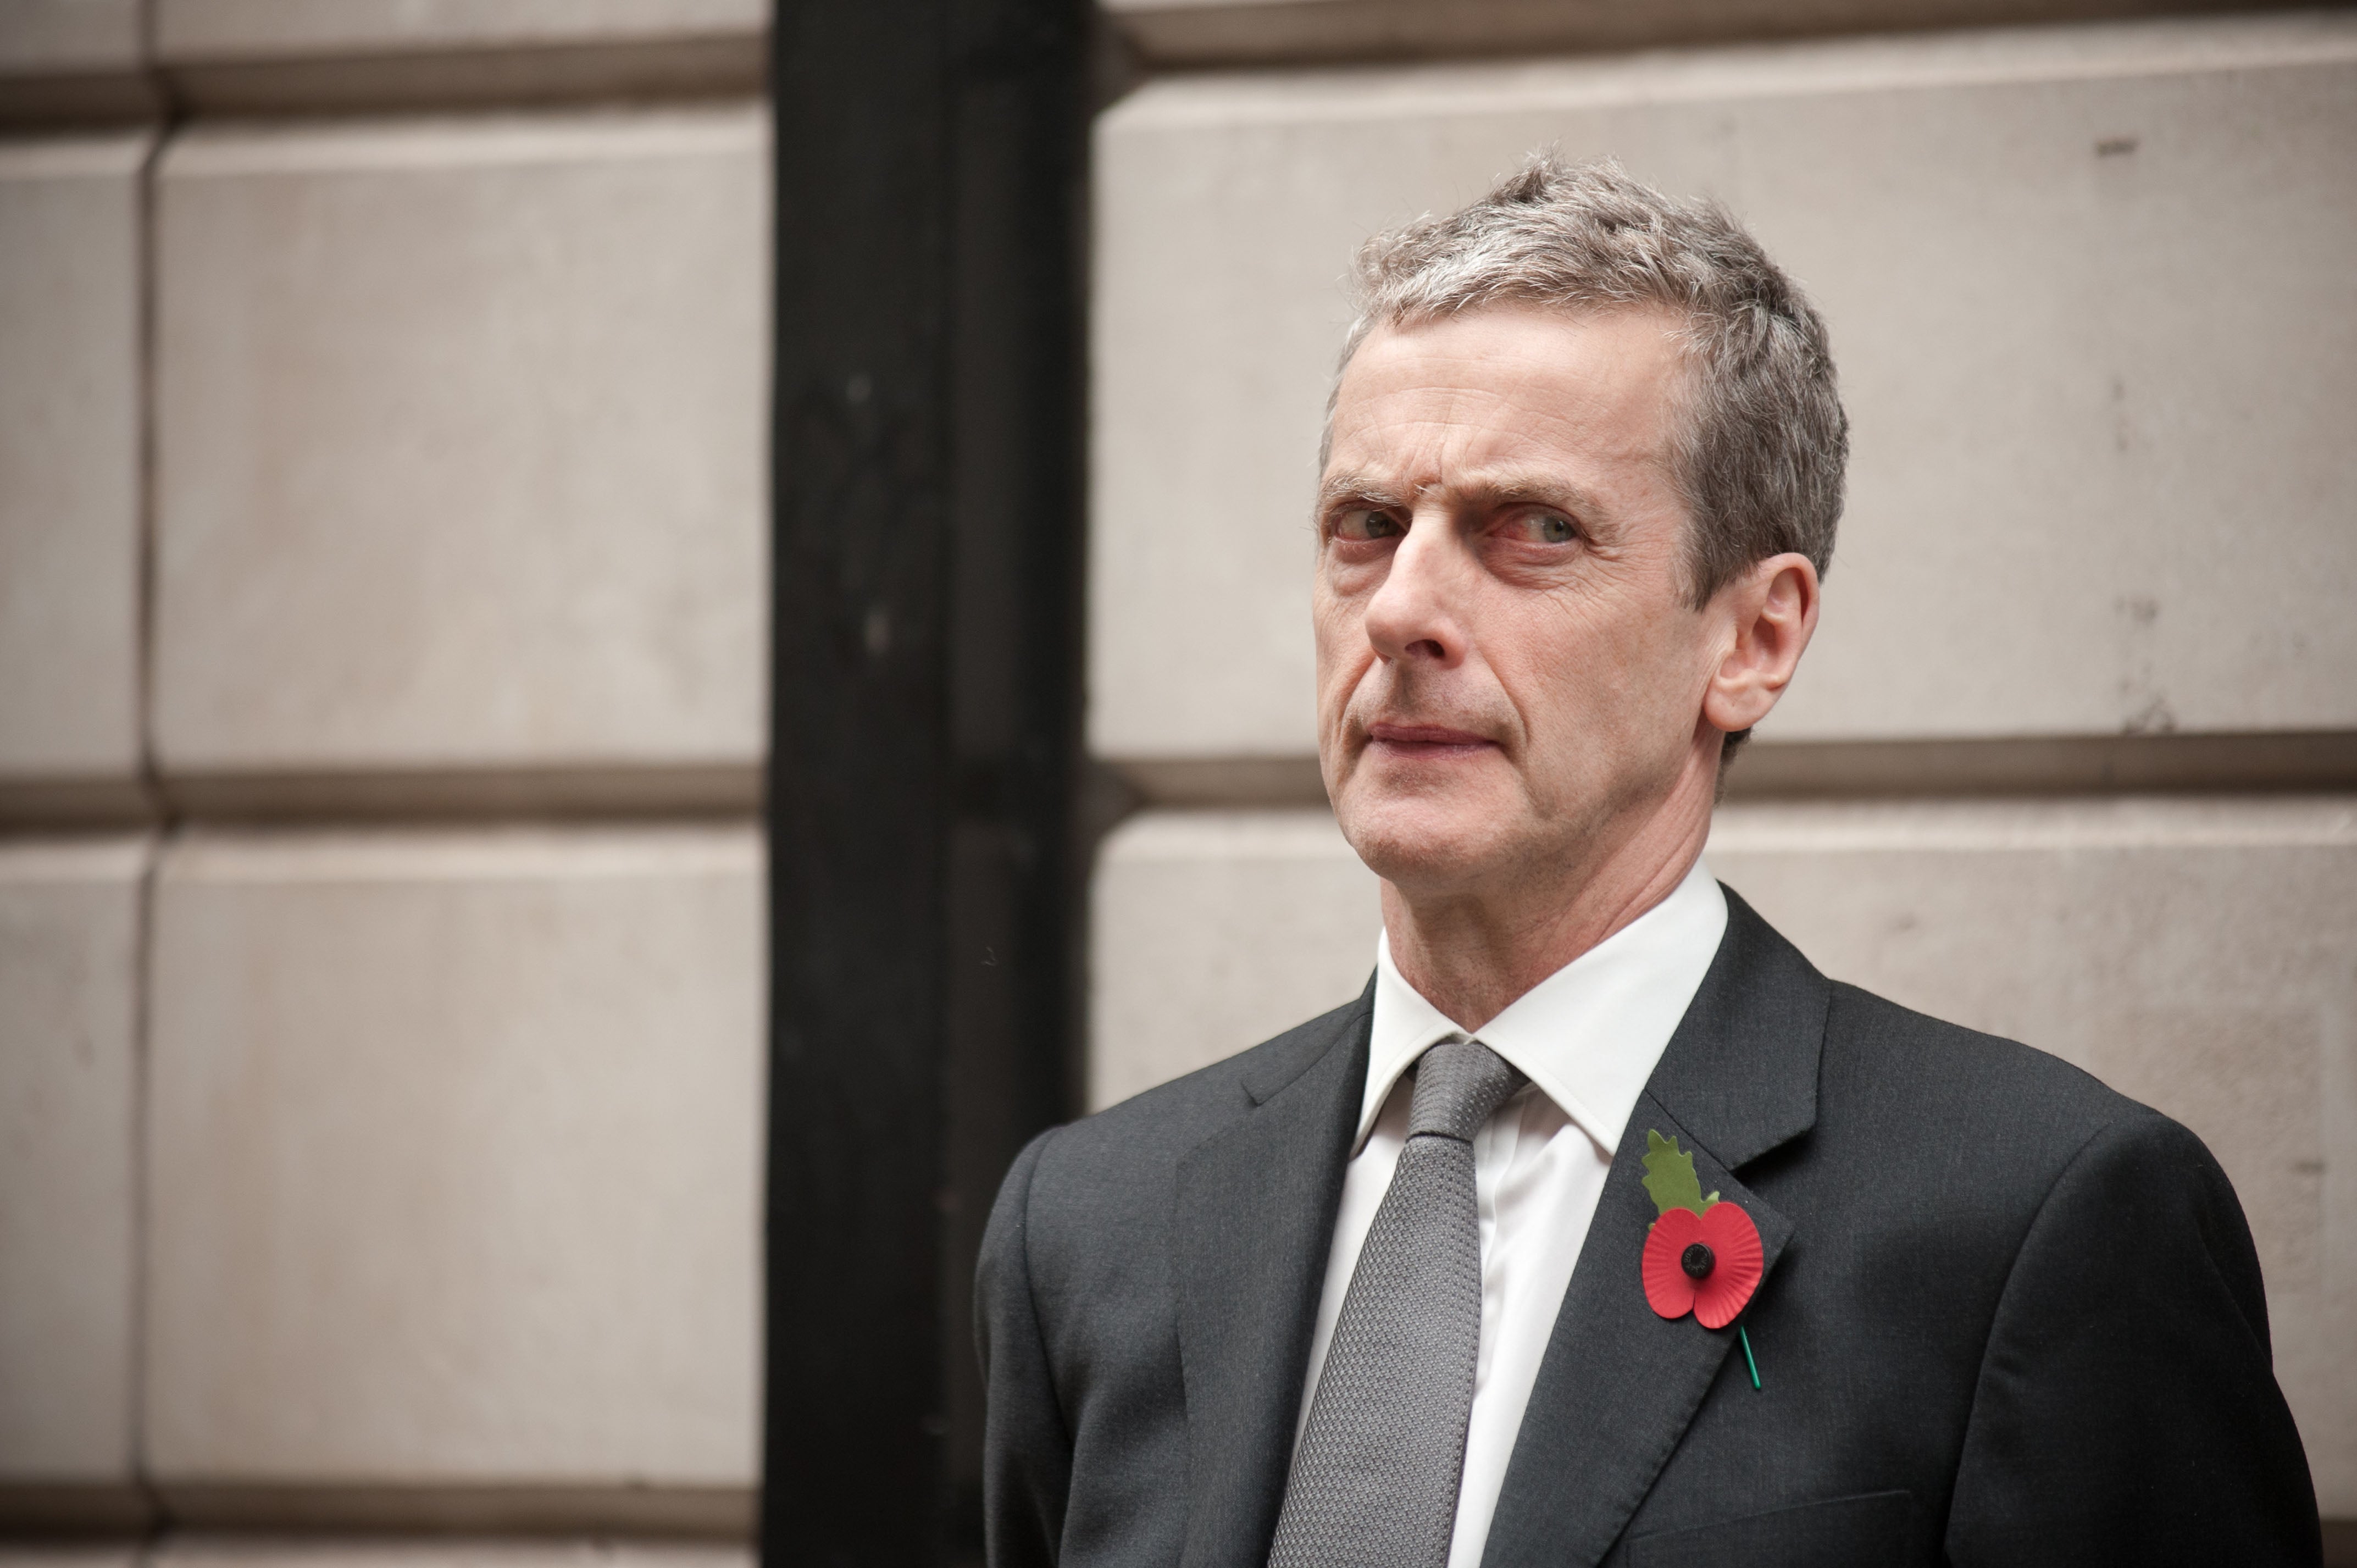 Peter Capaldi in ‘The Thick of It’